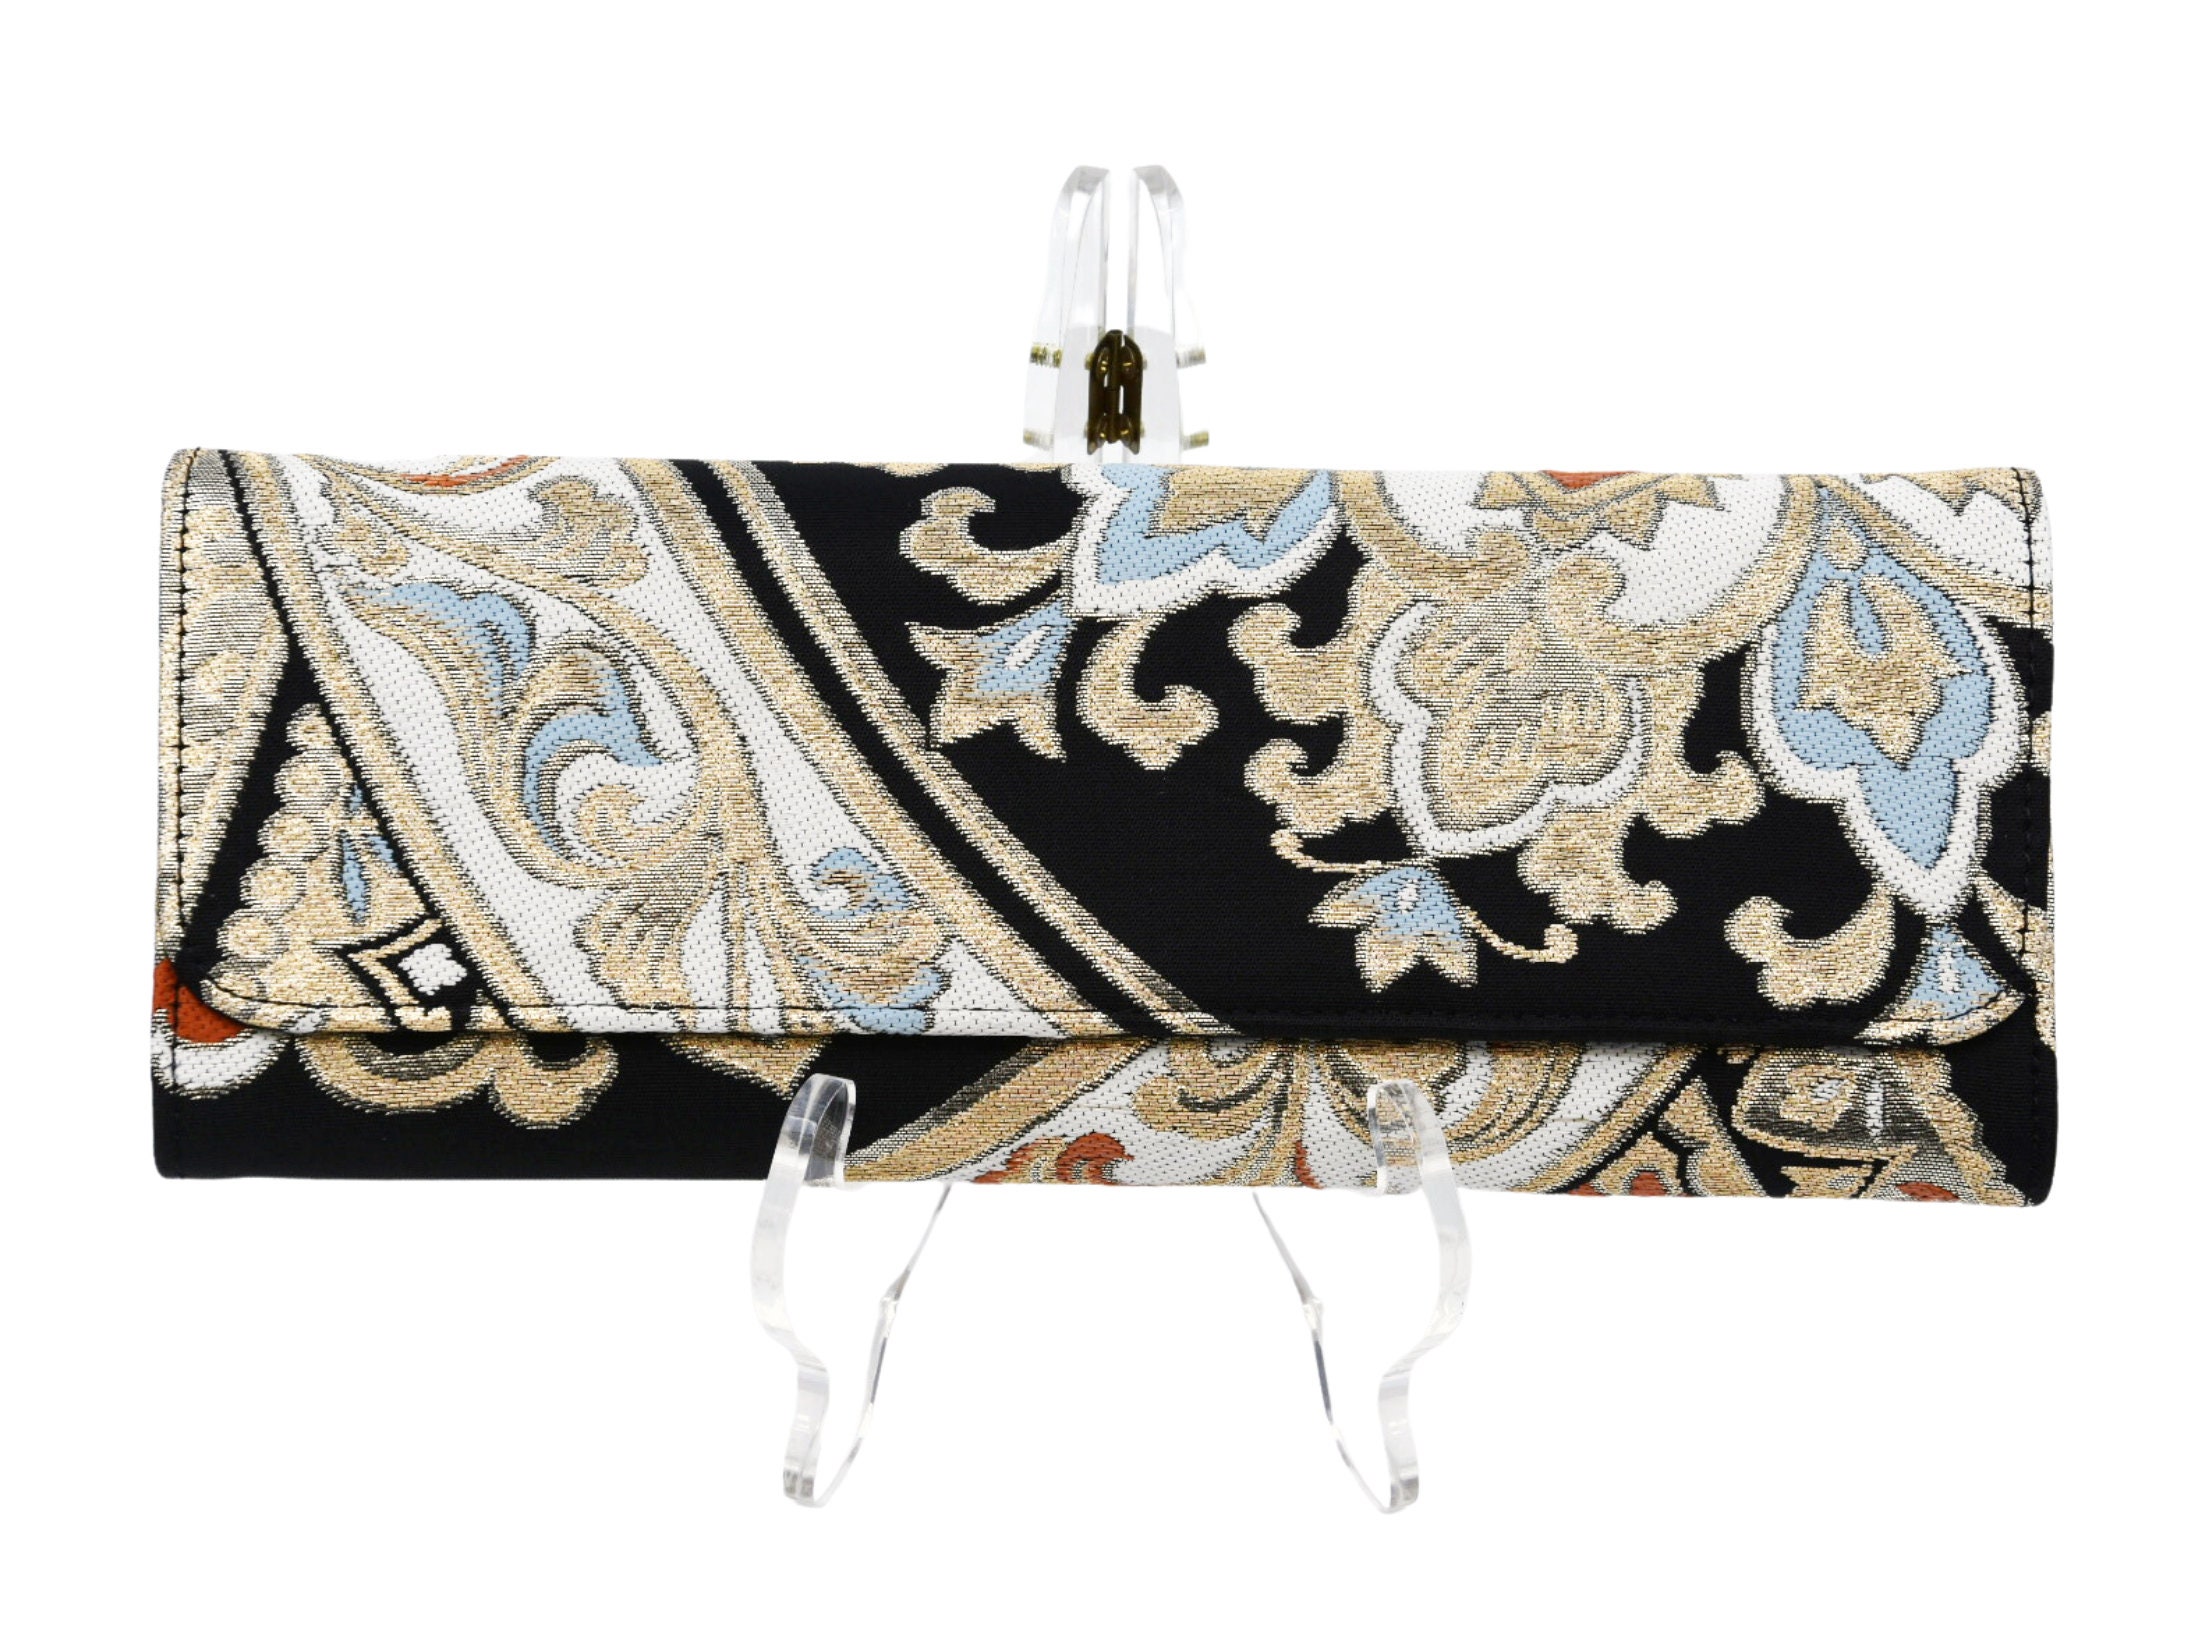 Cacao Clutch Bag - Women's Evening Bags & Clutches by Mardere